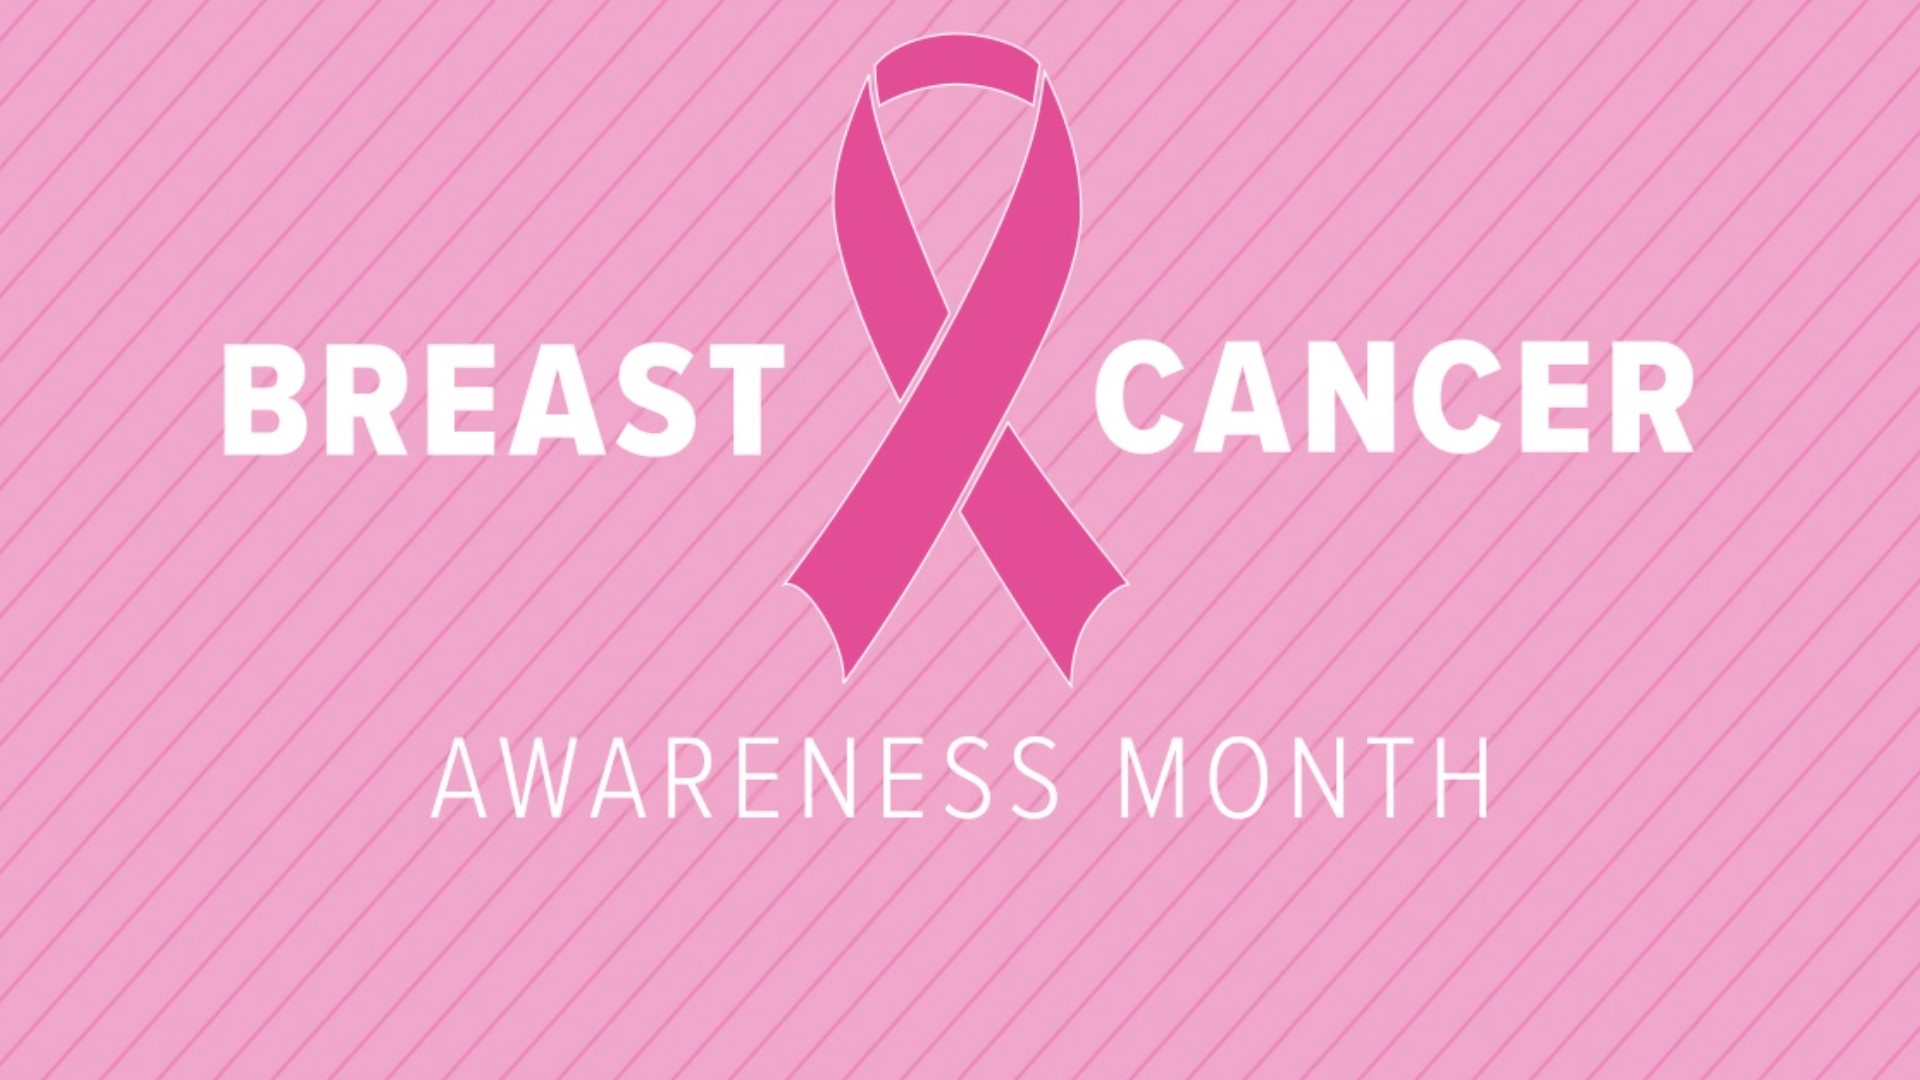 October is Breast Cancer Awareness Month, and Geisinger is stressing the importance of knowing your family history.